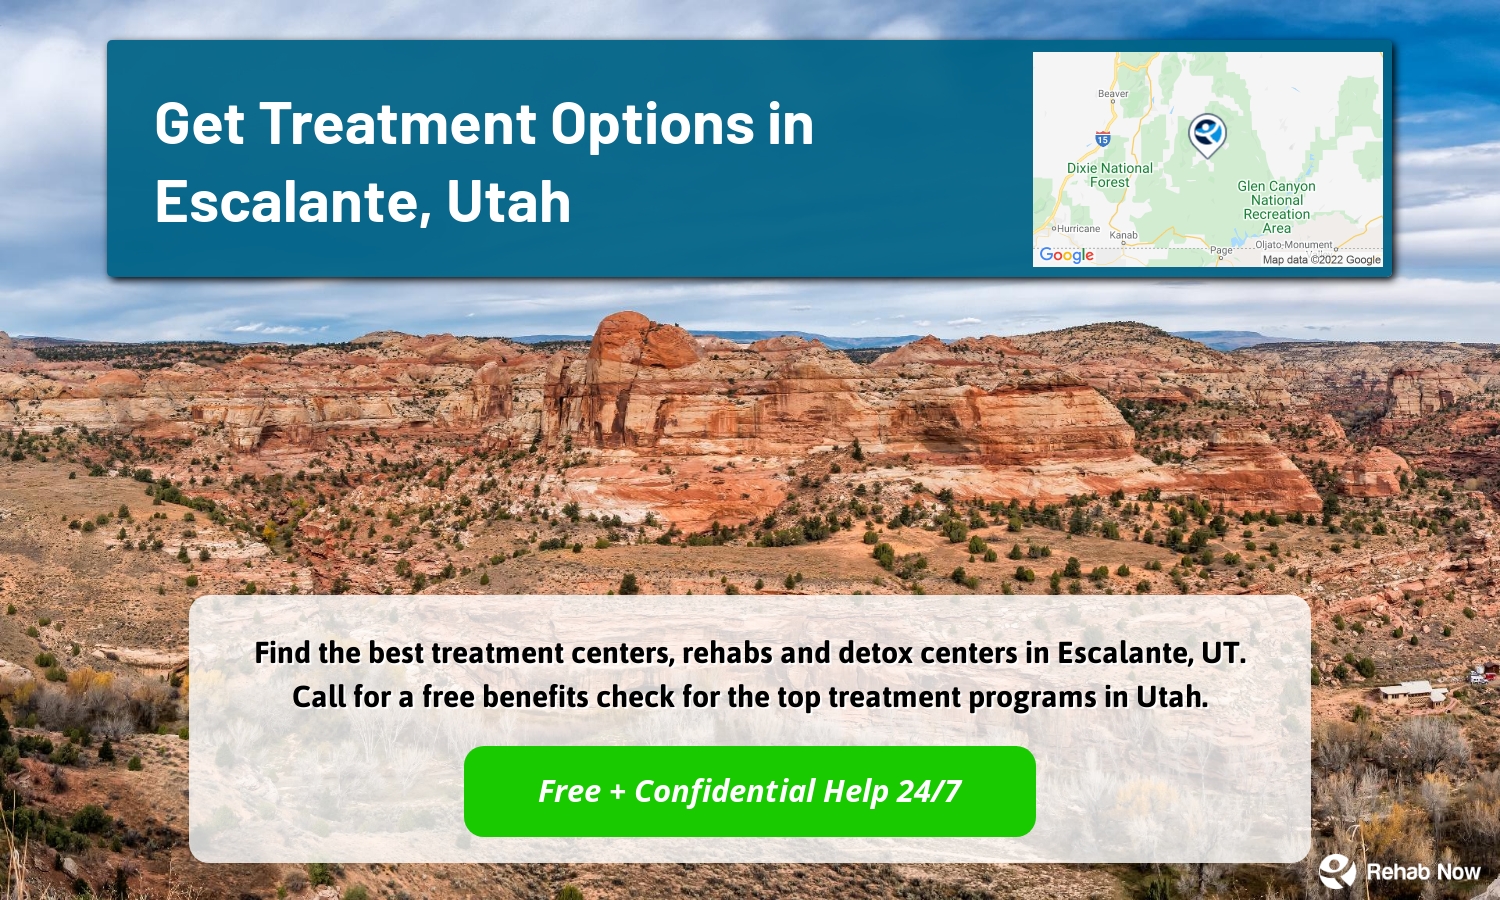 Find the best treatment centers, rehabs and detox centers in Escalante, UT. Call for a free benefits check for the top treatment programs in Utah.